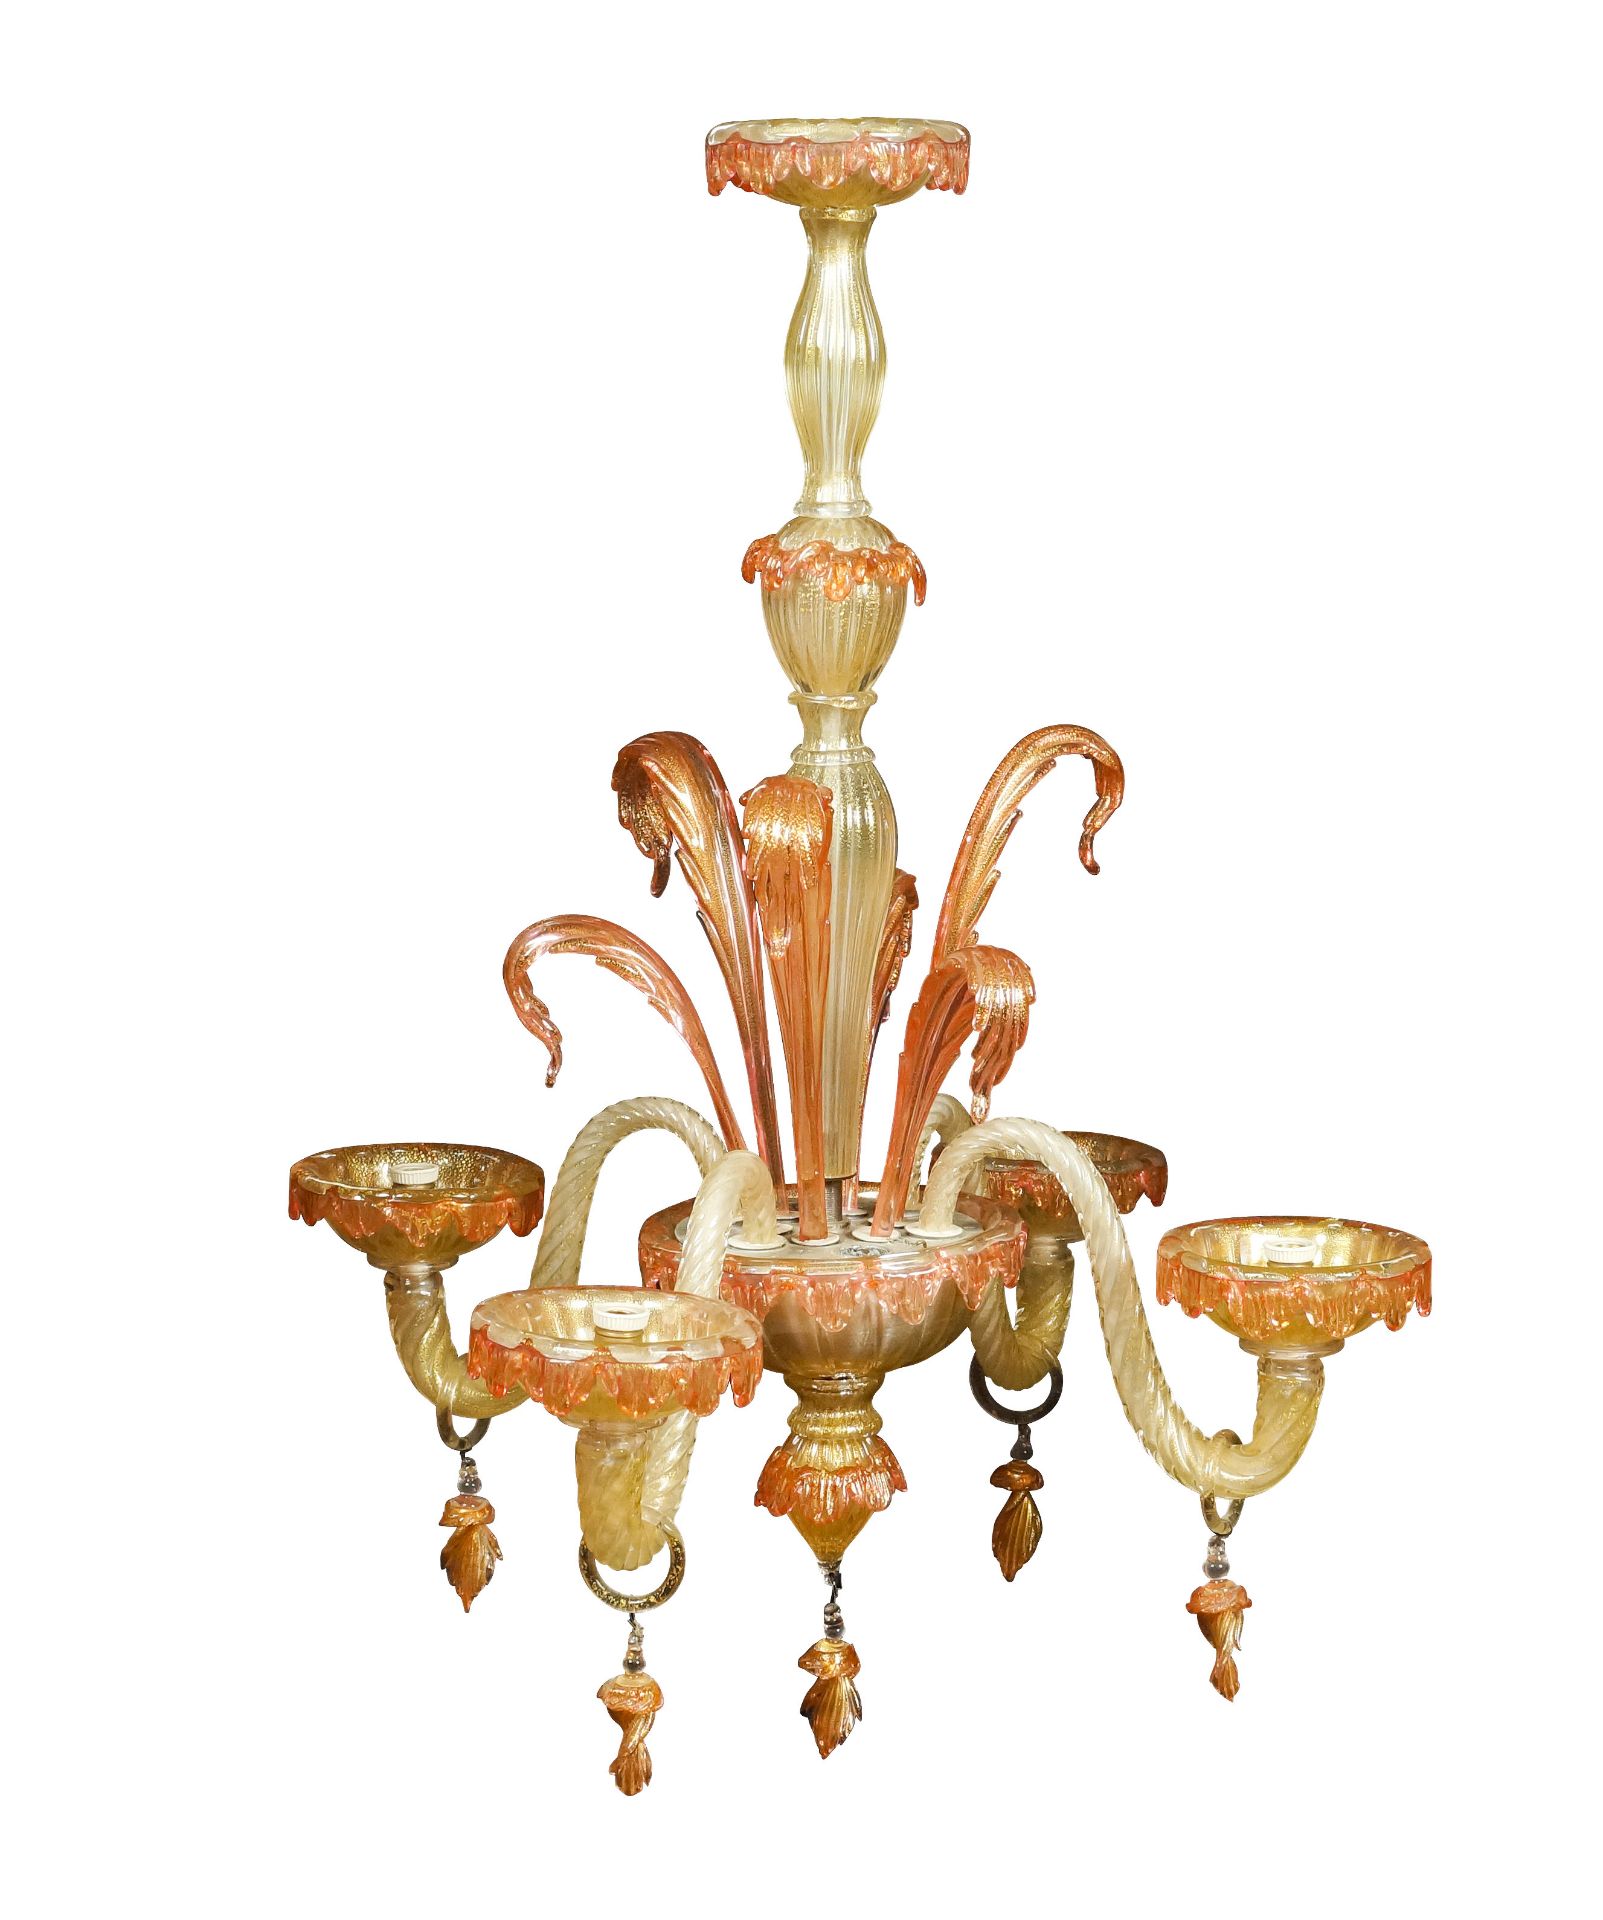 A four-branch Murano glass chandelier